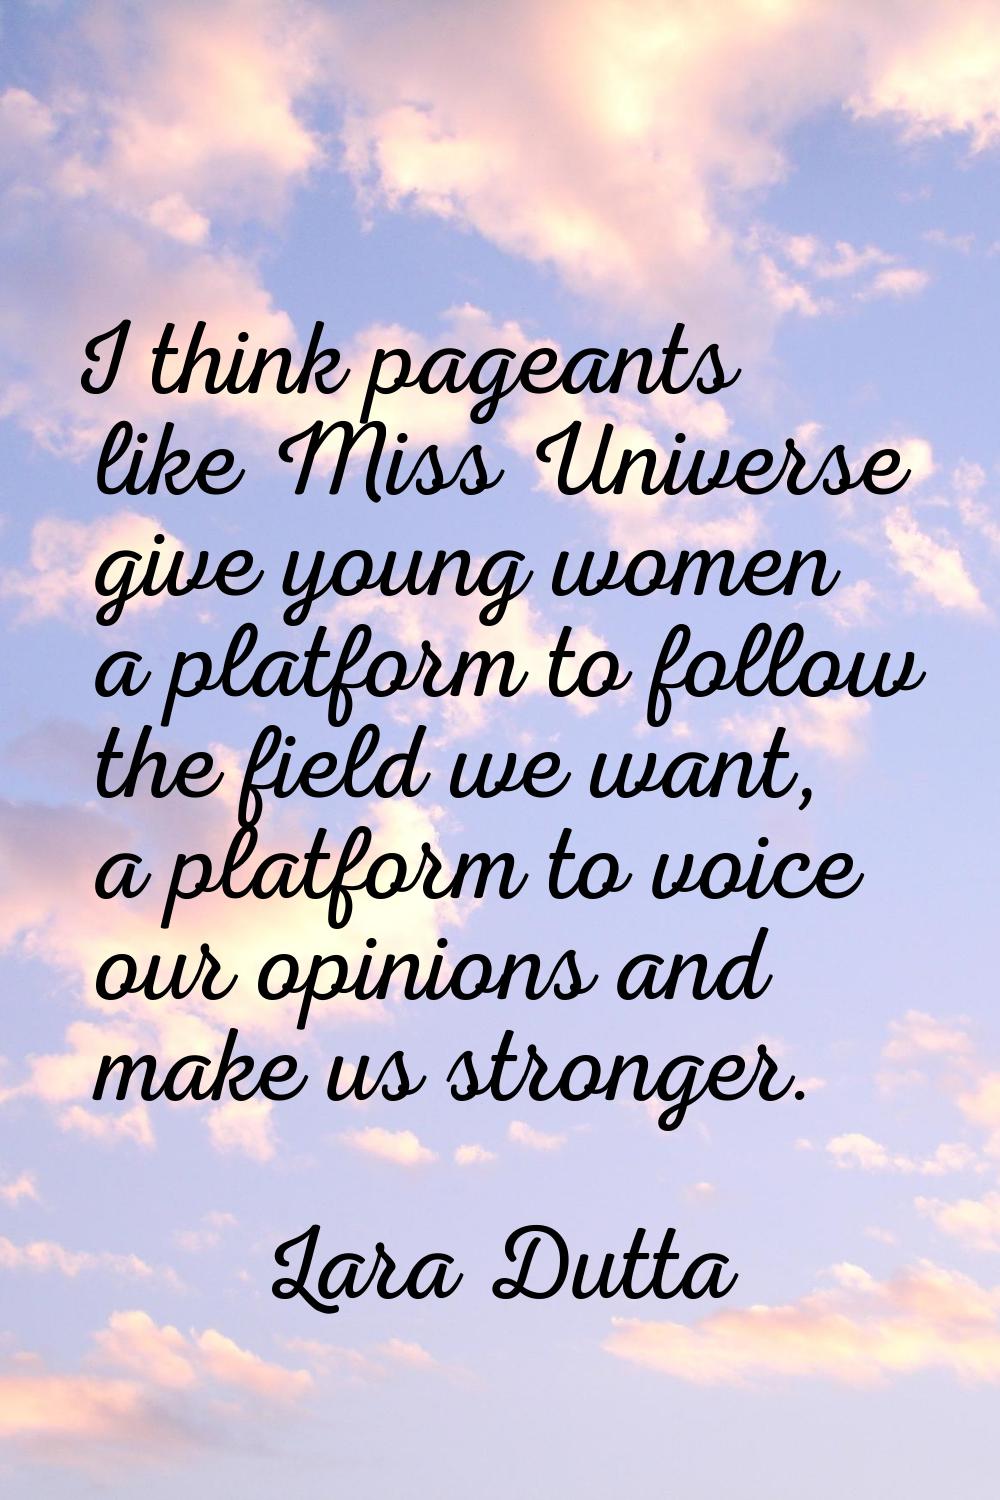 I think pageants like Miss Universe give young women a platform to follow the field we want, a plat